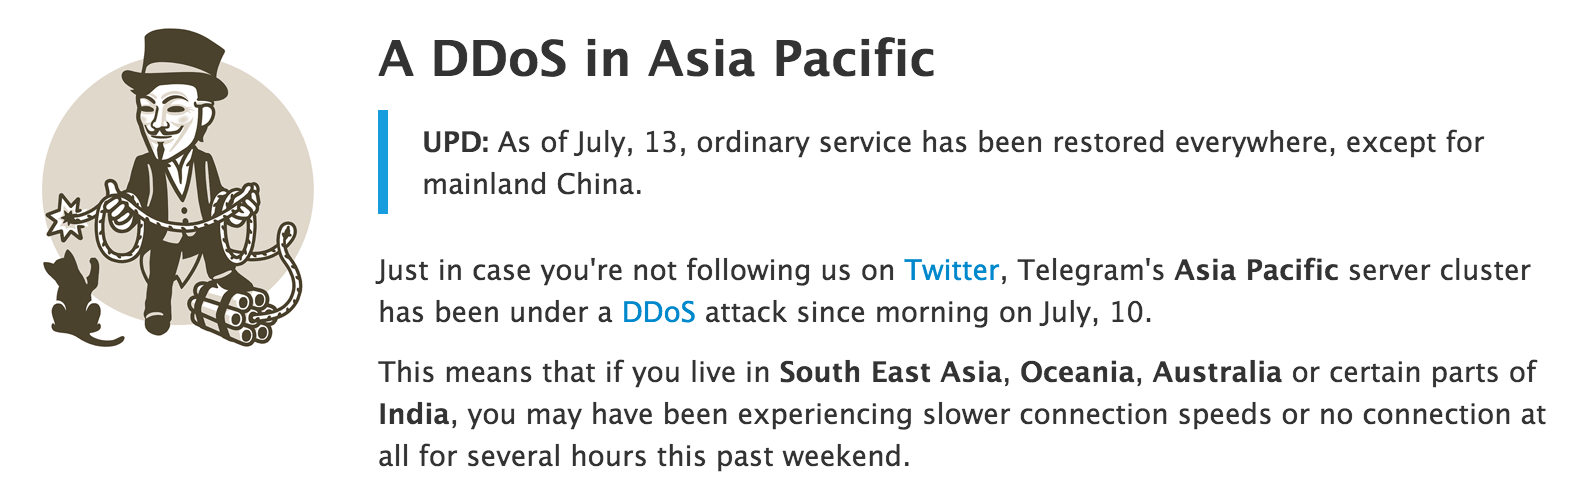  As of July, 13, ordinary service has been restored everywhere, except for mainland China.